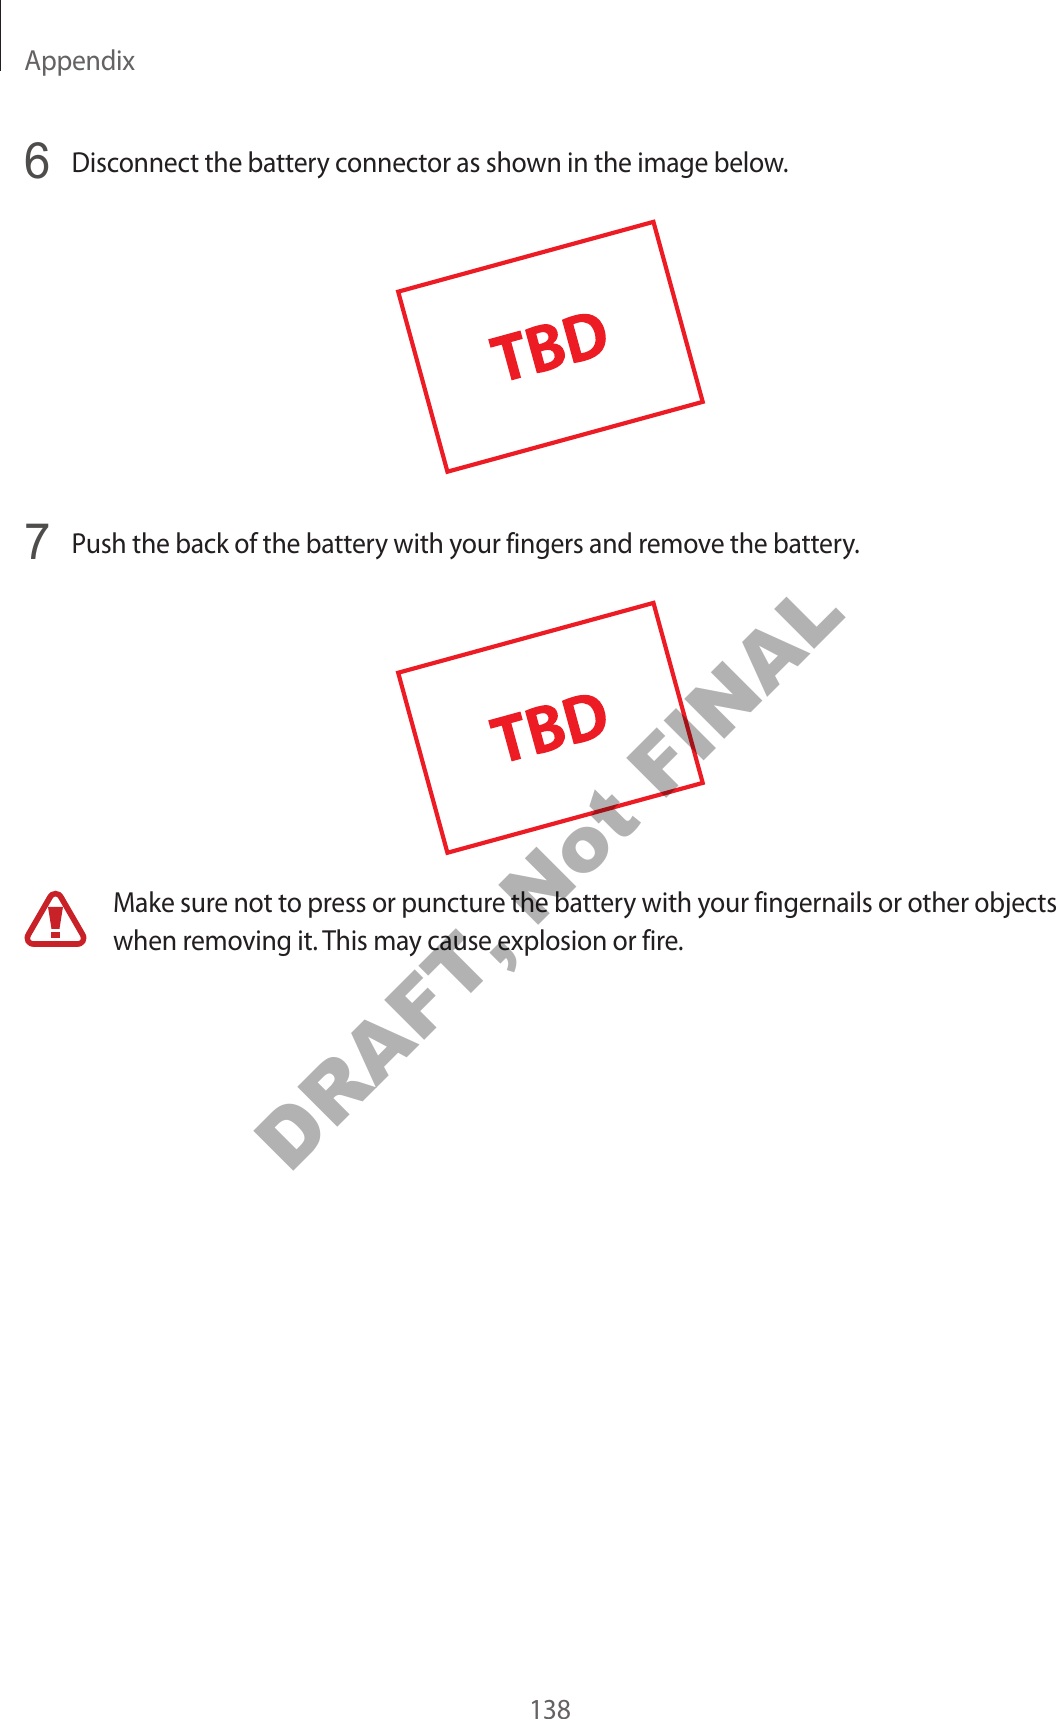 Appendix1386  Disconnect the battery connector as shown in the image below.7  Push the back of the ba ttery with your fingers and remov e the ba ttery.Make sure not to pr ess or puncture the battery with your fingernails or other objects when removing it . T his may cause e xplosion or fir e .DRAFT, Not FINAL